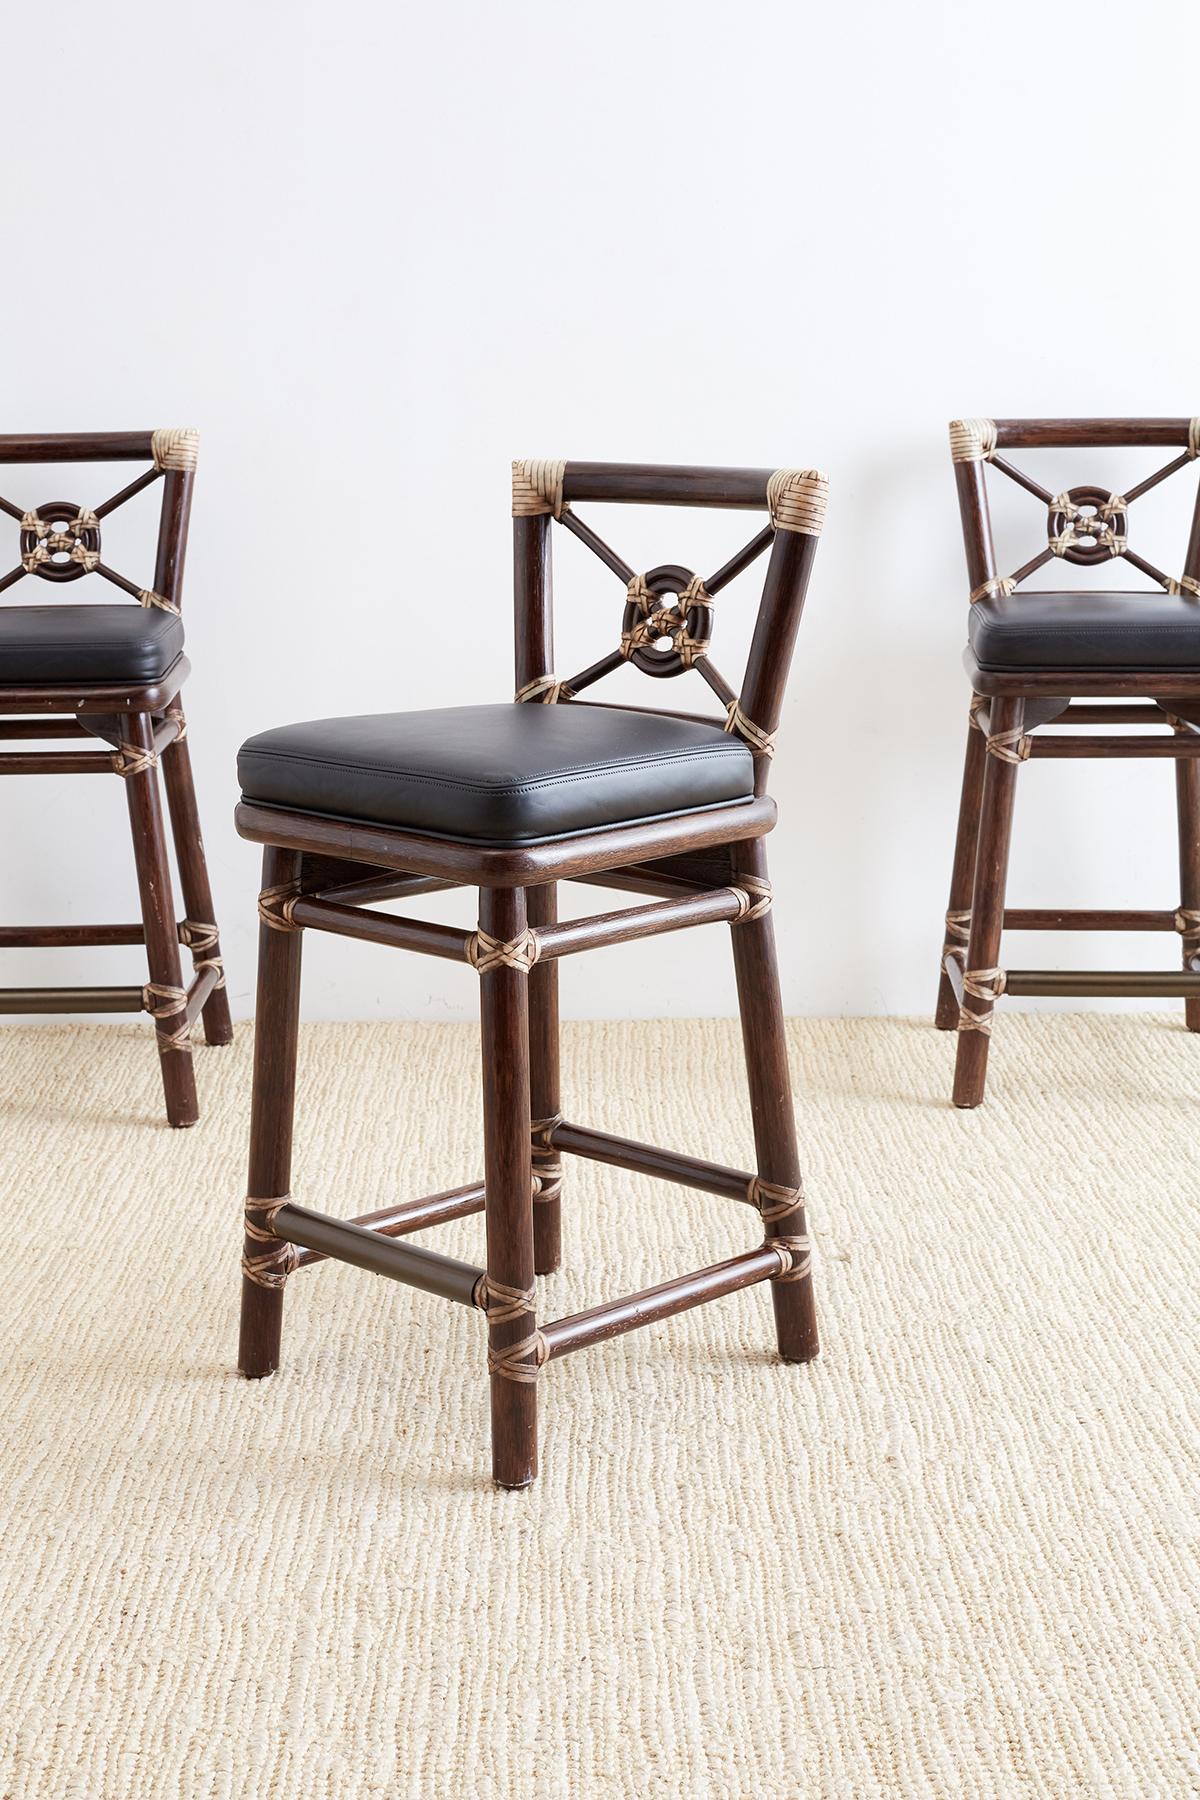 McGuire Rattan and Leather Target Design Counter Barstools 7